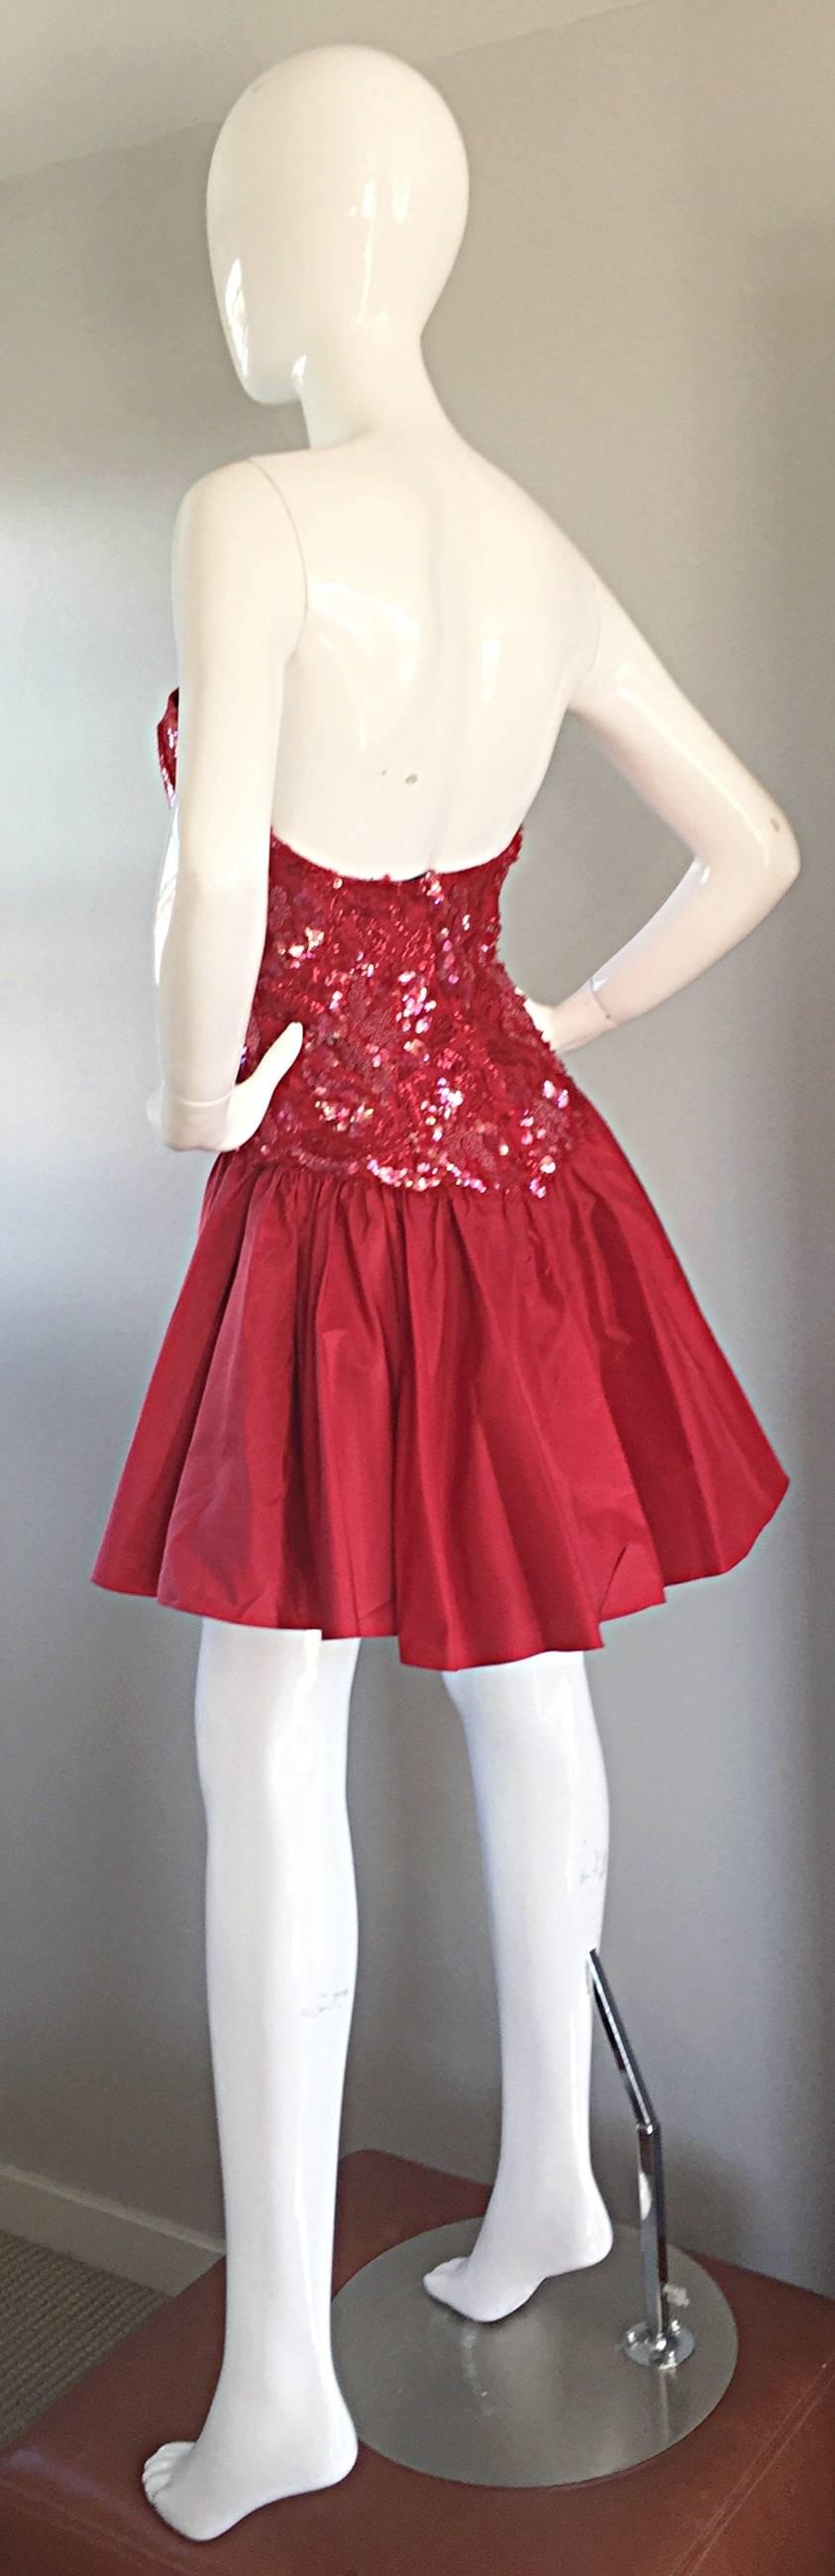 Joanna Mastroianni Beautiful Vintage 90s Candy Apple Red Strapless Sequin Dress For Sale 1